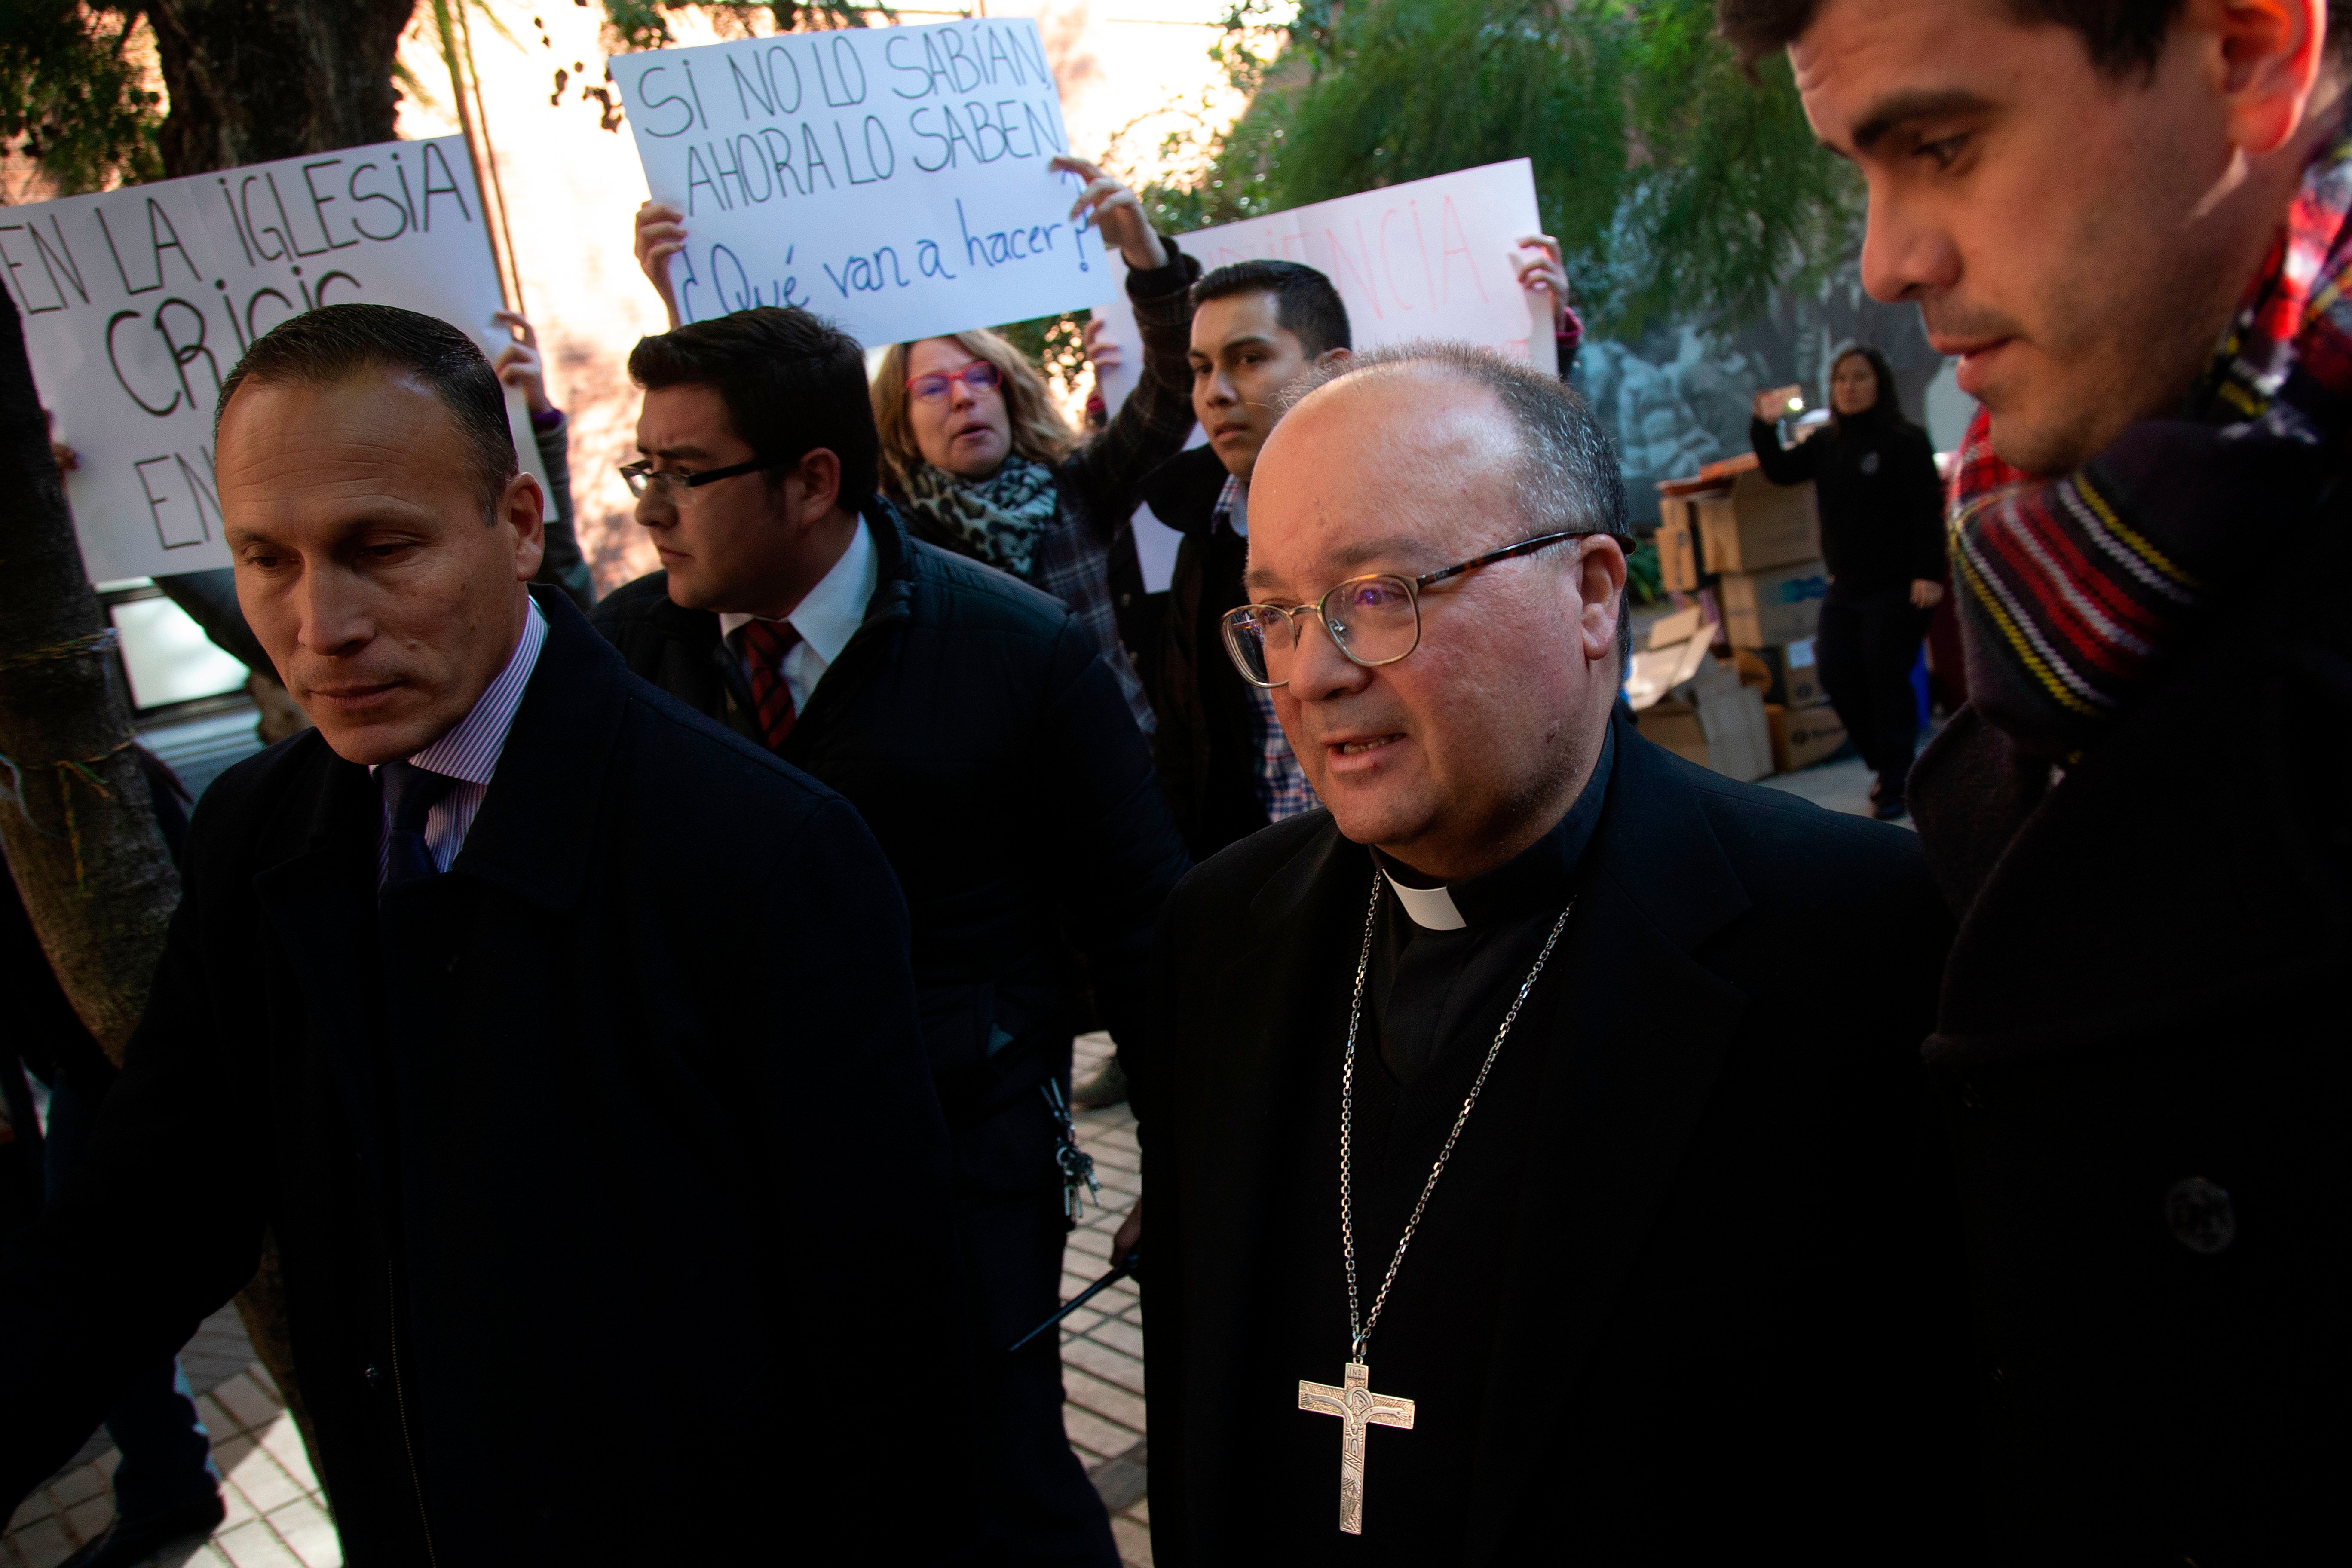 Students demonstrate against the sexual abuse scandal within the Church in Chile as Vatican's top abuse investigator Maltese archbishop Charles Scicluna (R) visits Catholic University in Santiago on June 13, 2018. - Scicluna arrived in Chile on Tuesday, a day after Pope Francis accepted the resignation of three bishops from the scandal-wracked Chilean Church. Maltese archbishop Charles Scicluna and fellow papal envoy Jordi Bertomeu arrived to take witness statements from victims of sexual abuse within the Church and provide instruction to Chilean dioceses to respond adequately to any new complaints. (CLAUDIO REYES/AFP/Getty Images)